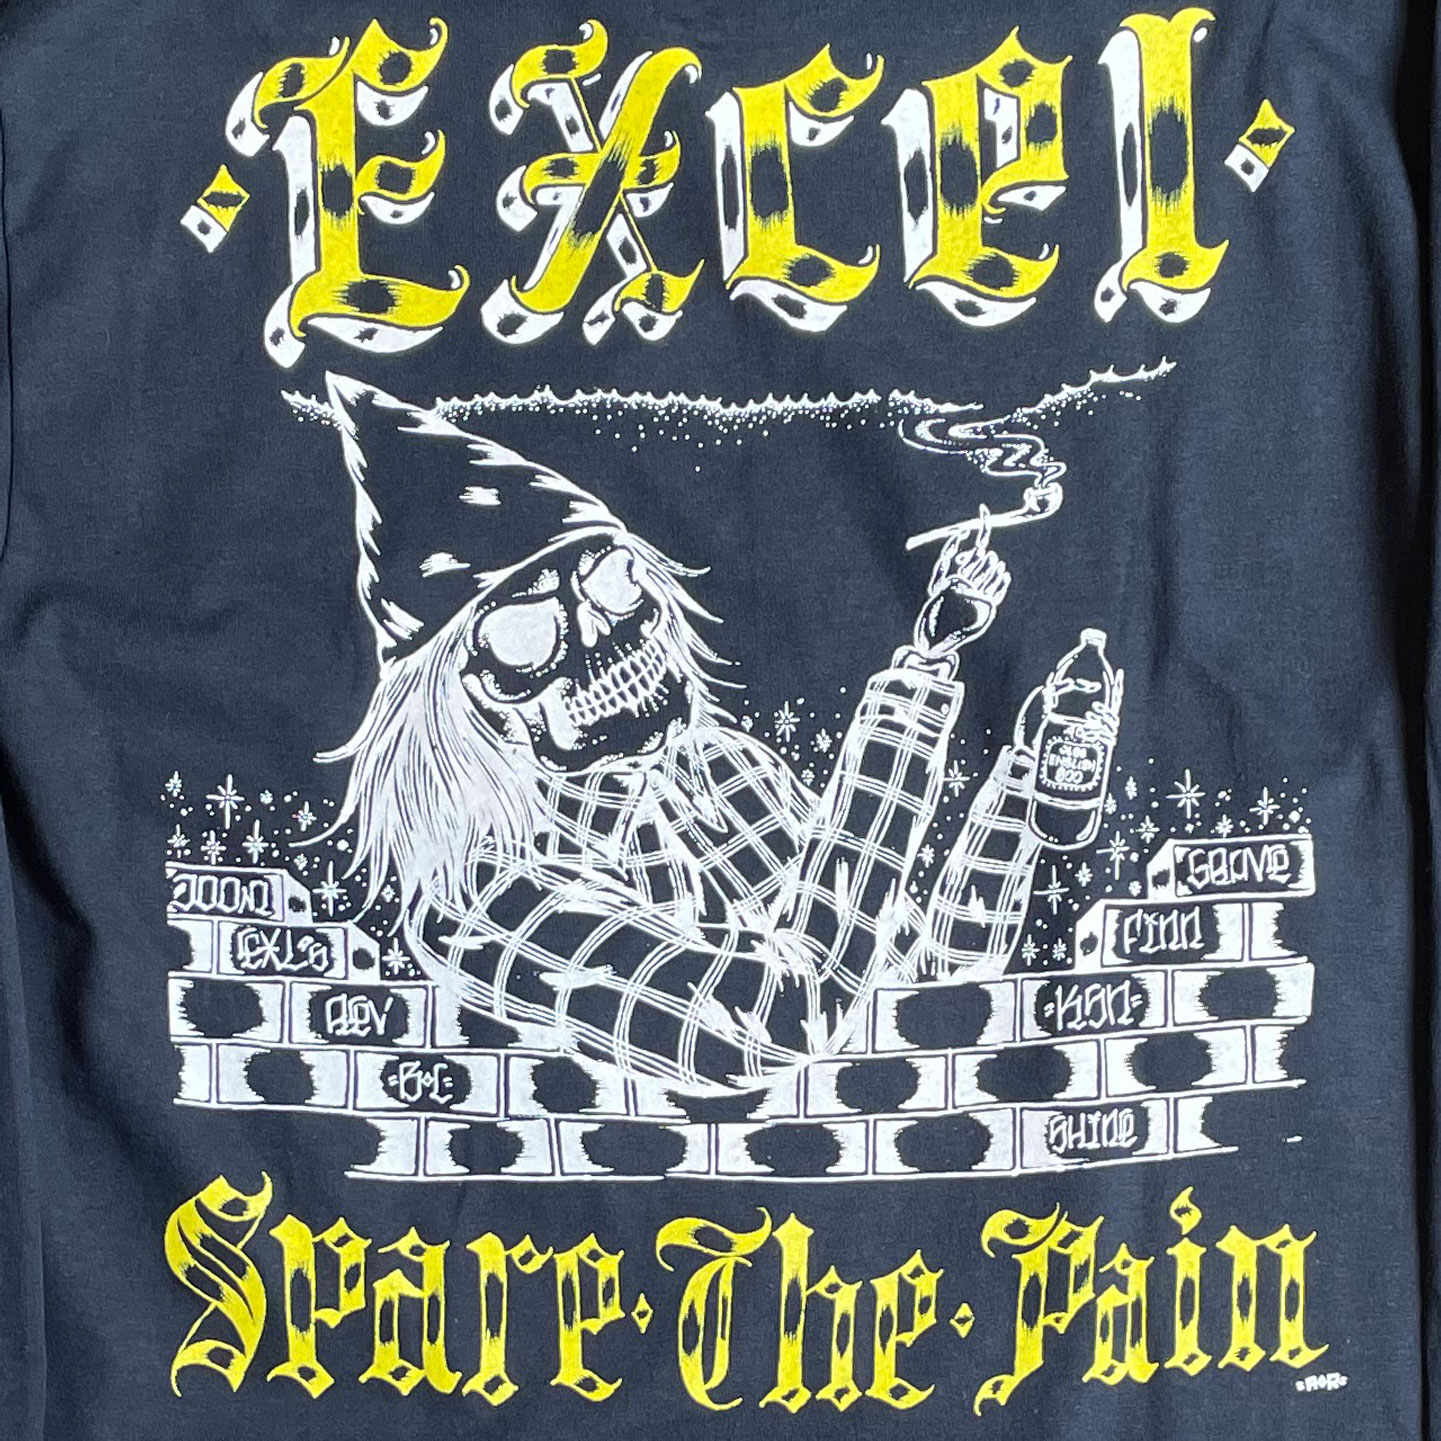 EXCEL ロングスリーブTシャツ SPARE THE PAIN OFFICIAL!